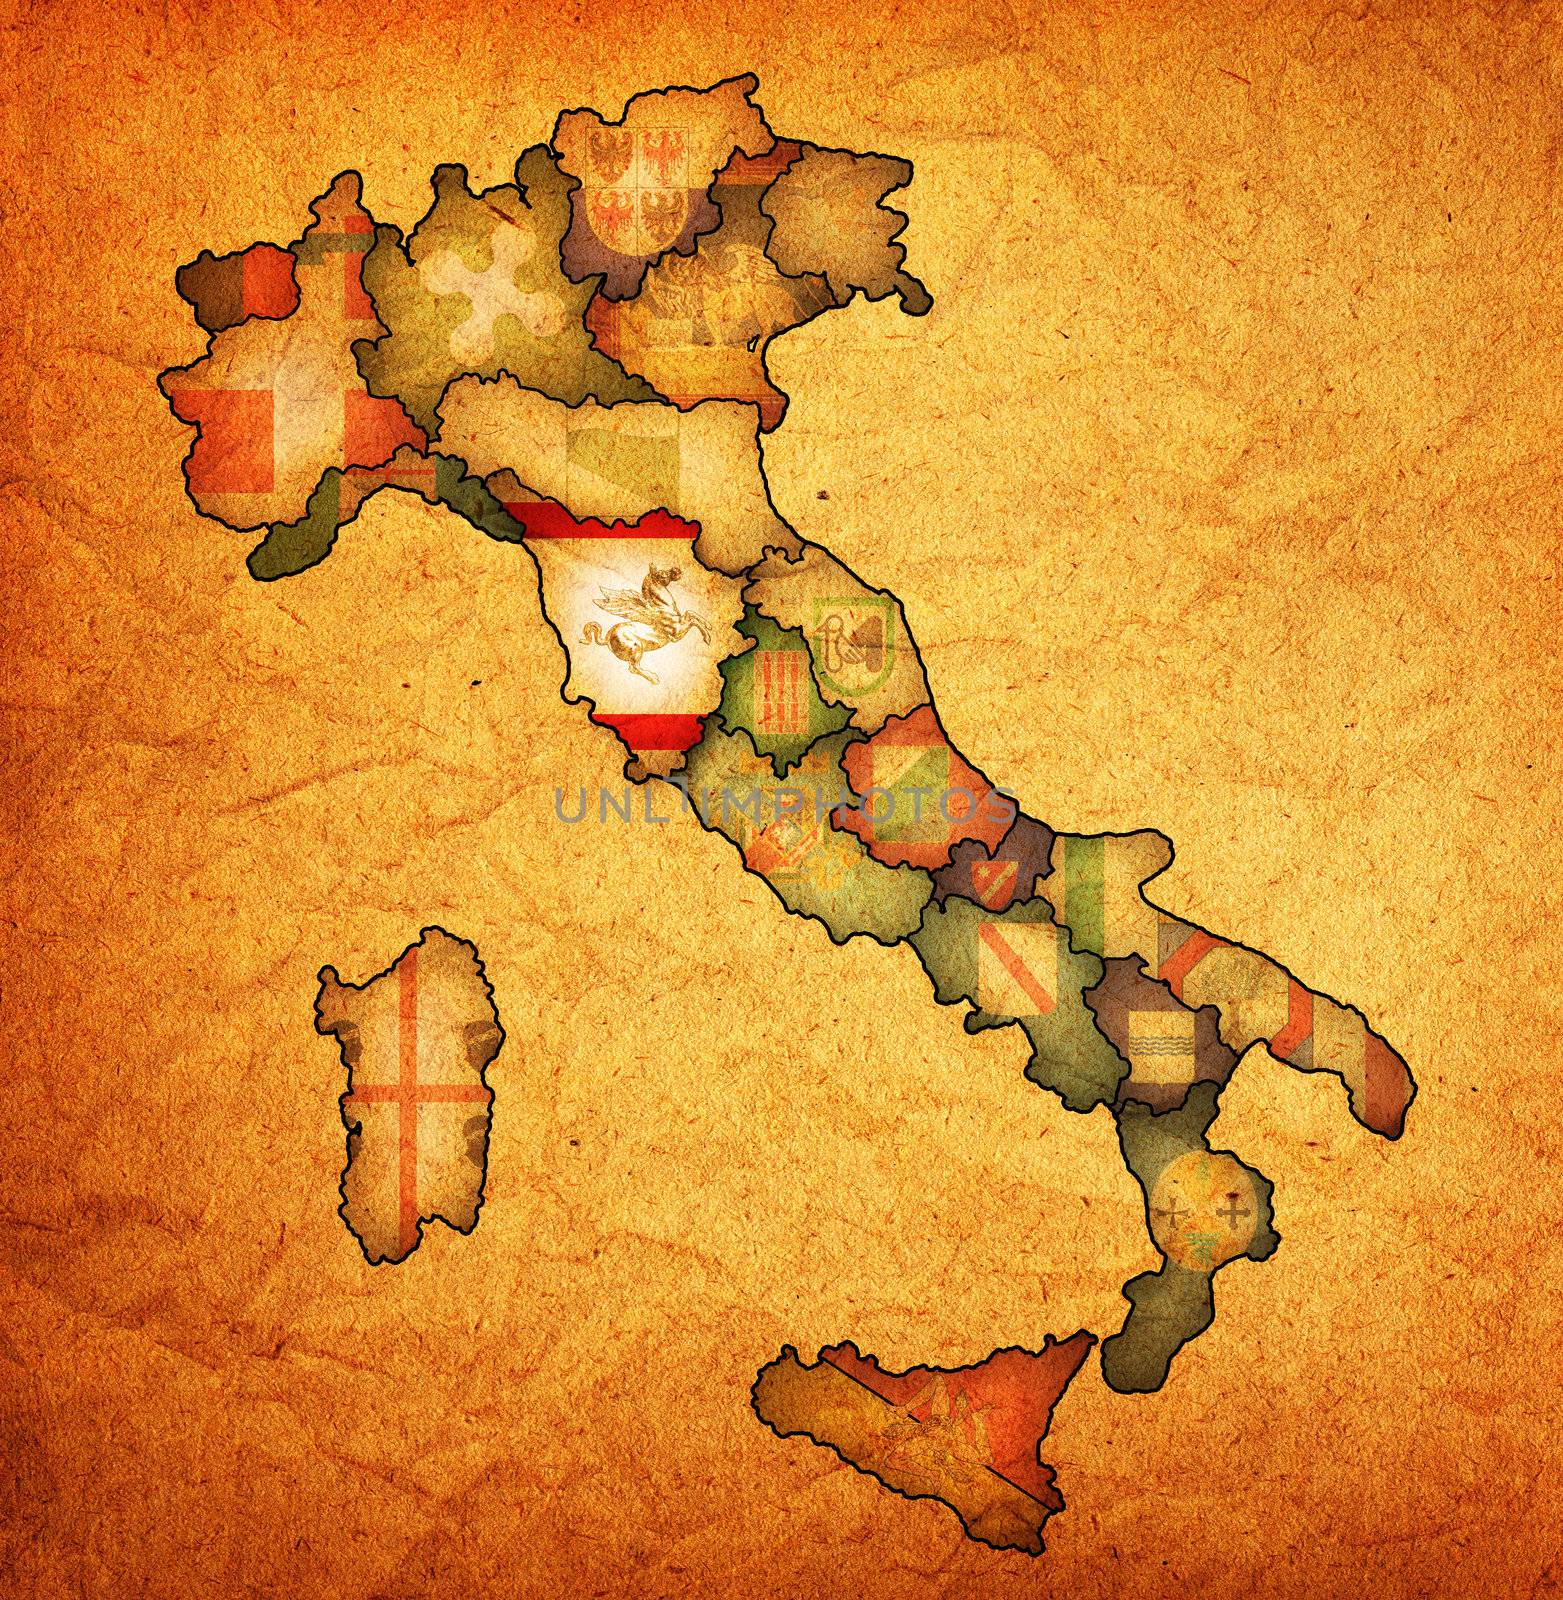 tuscany region on administration map of italy with flags